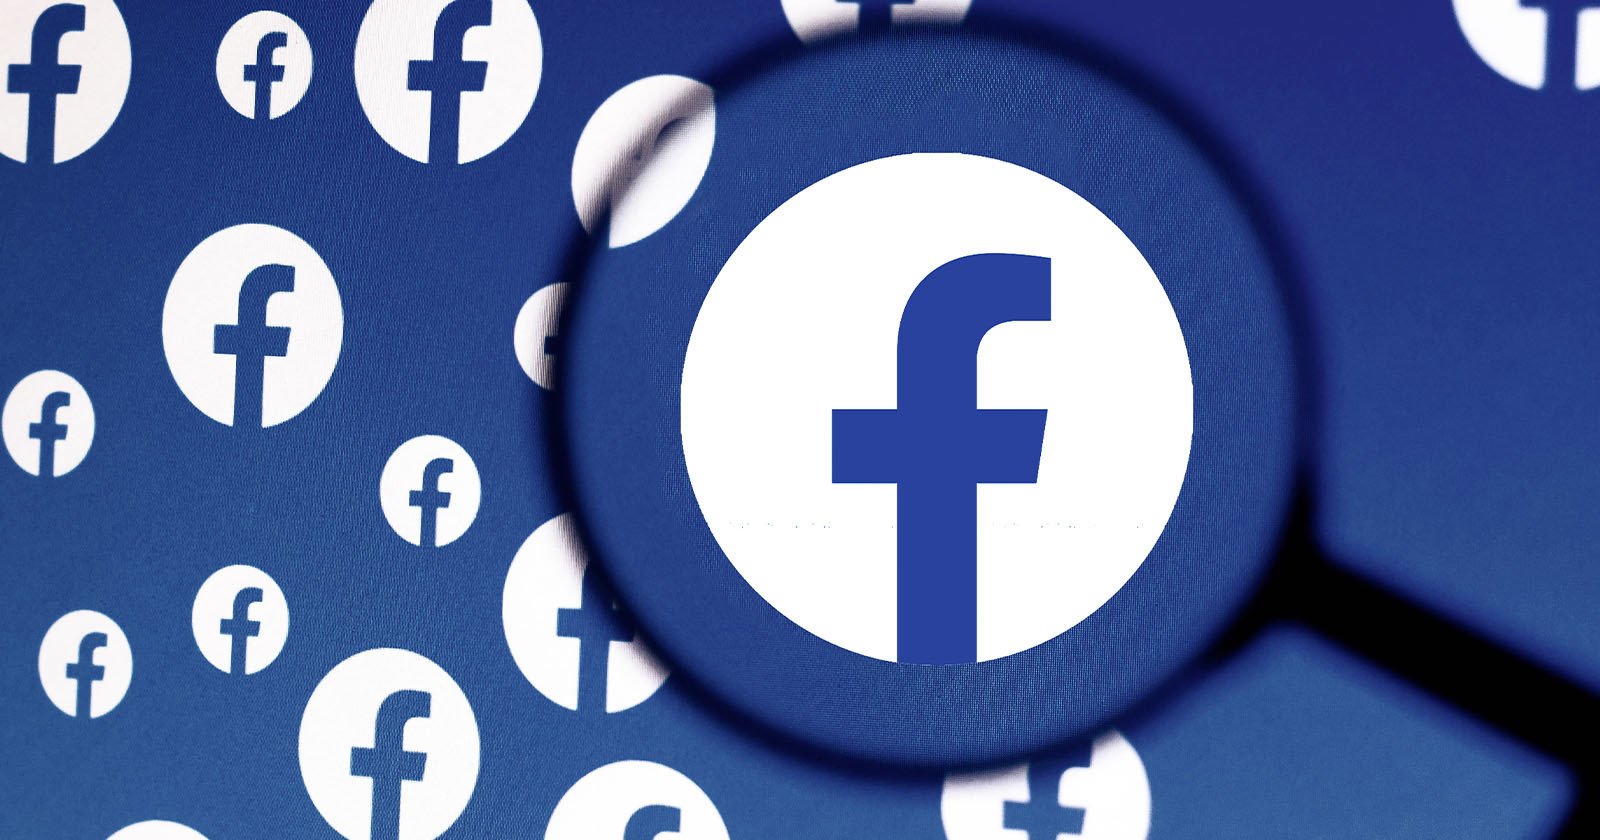 Two Separate Reports Scrutinize Facebooks Policies and Algorithm